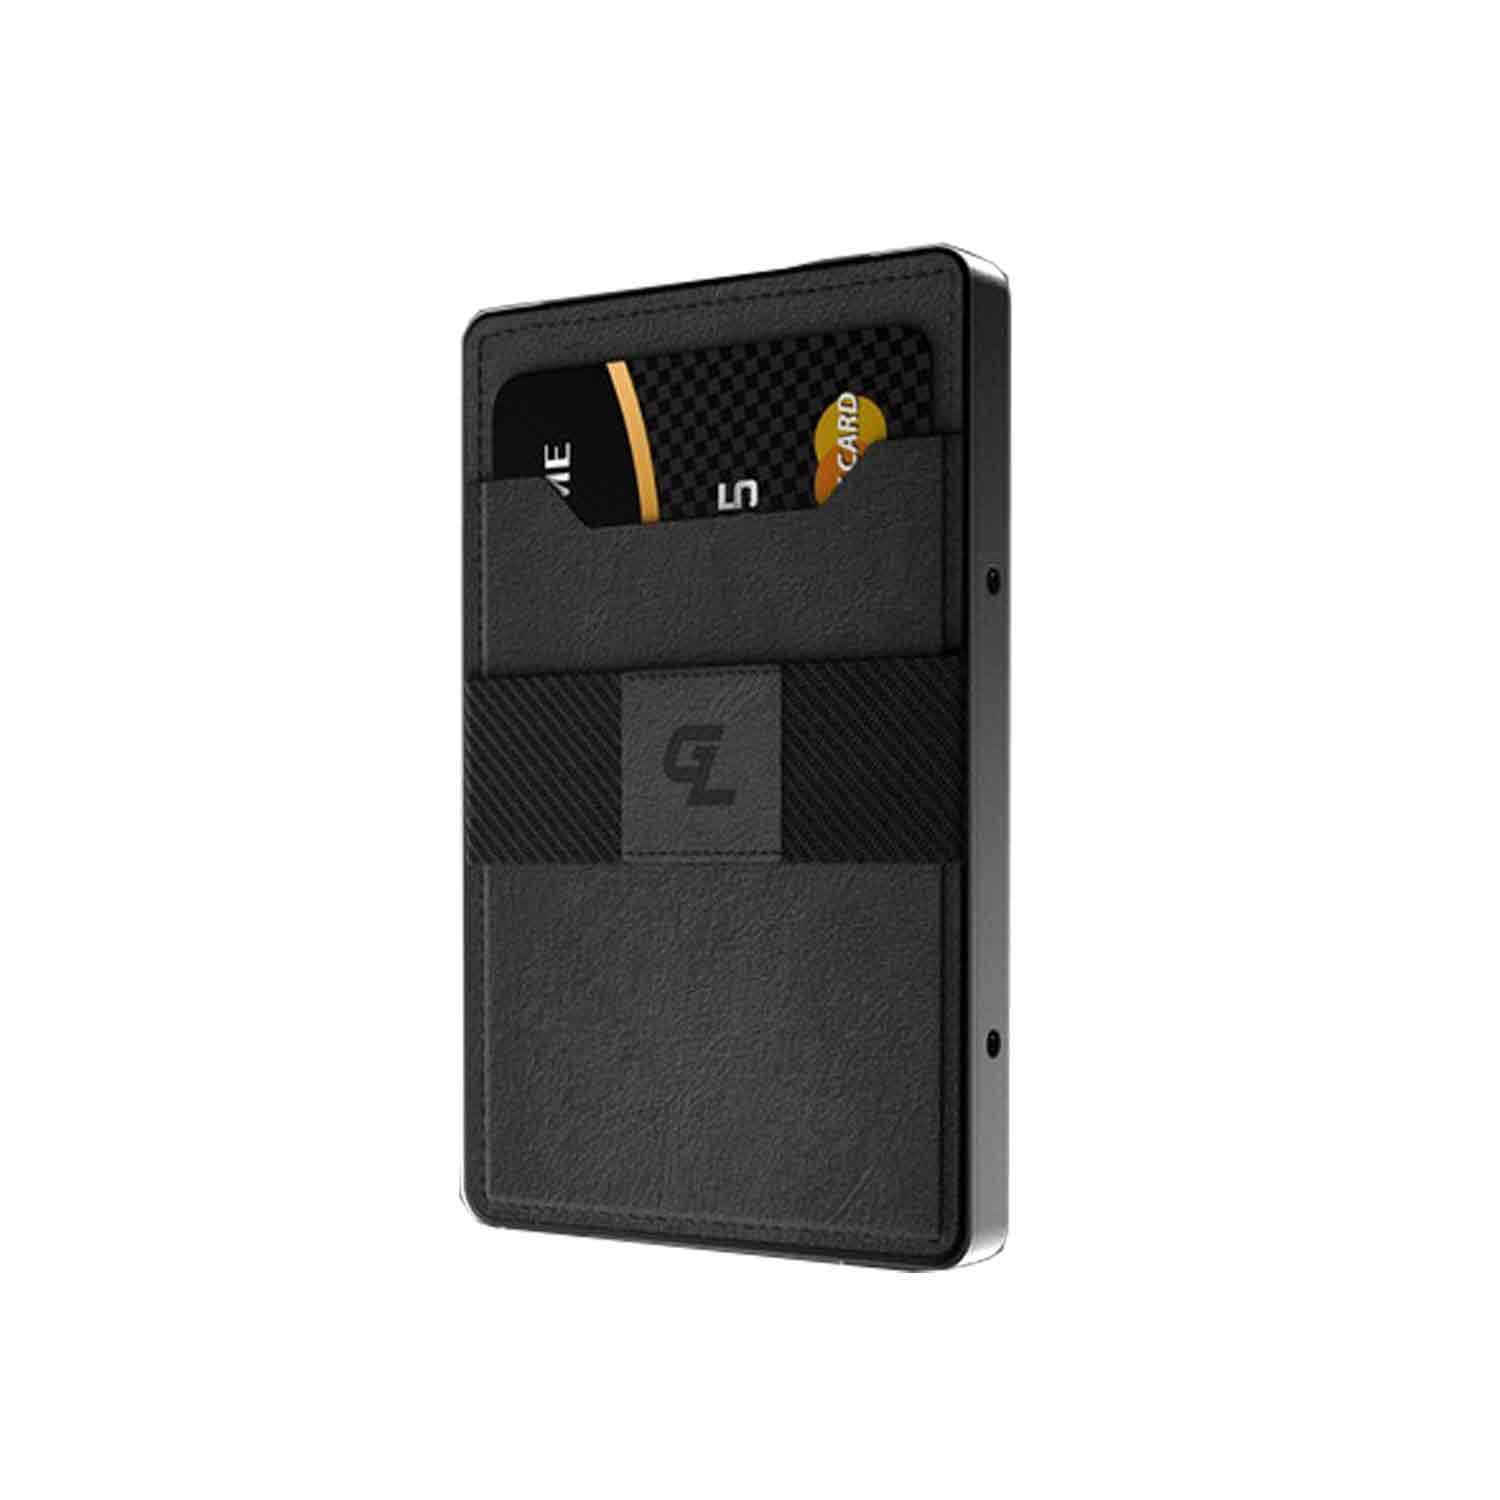 Groove Life Groove Wallet (Gun Metal with Black Leather Card Sleeve)